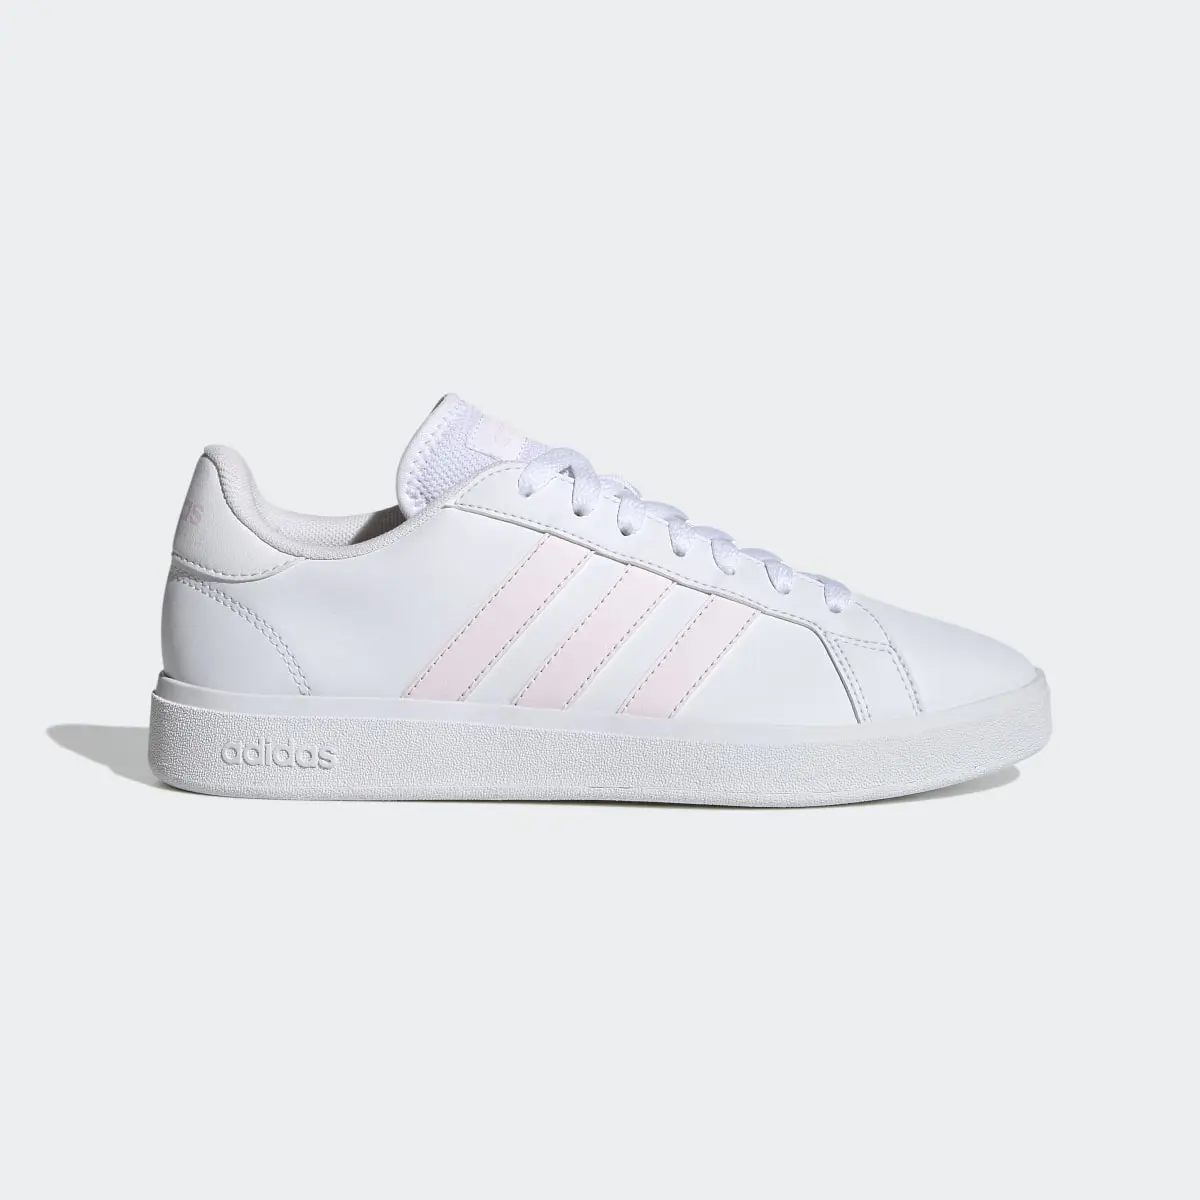 Adidas Grand Court TD Lifestyle Court Casual Shoes. 2